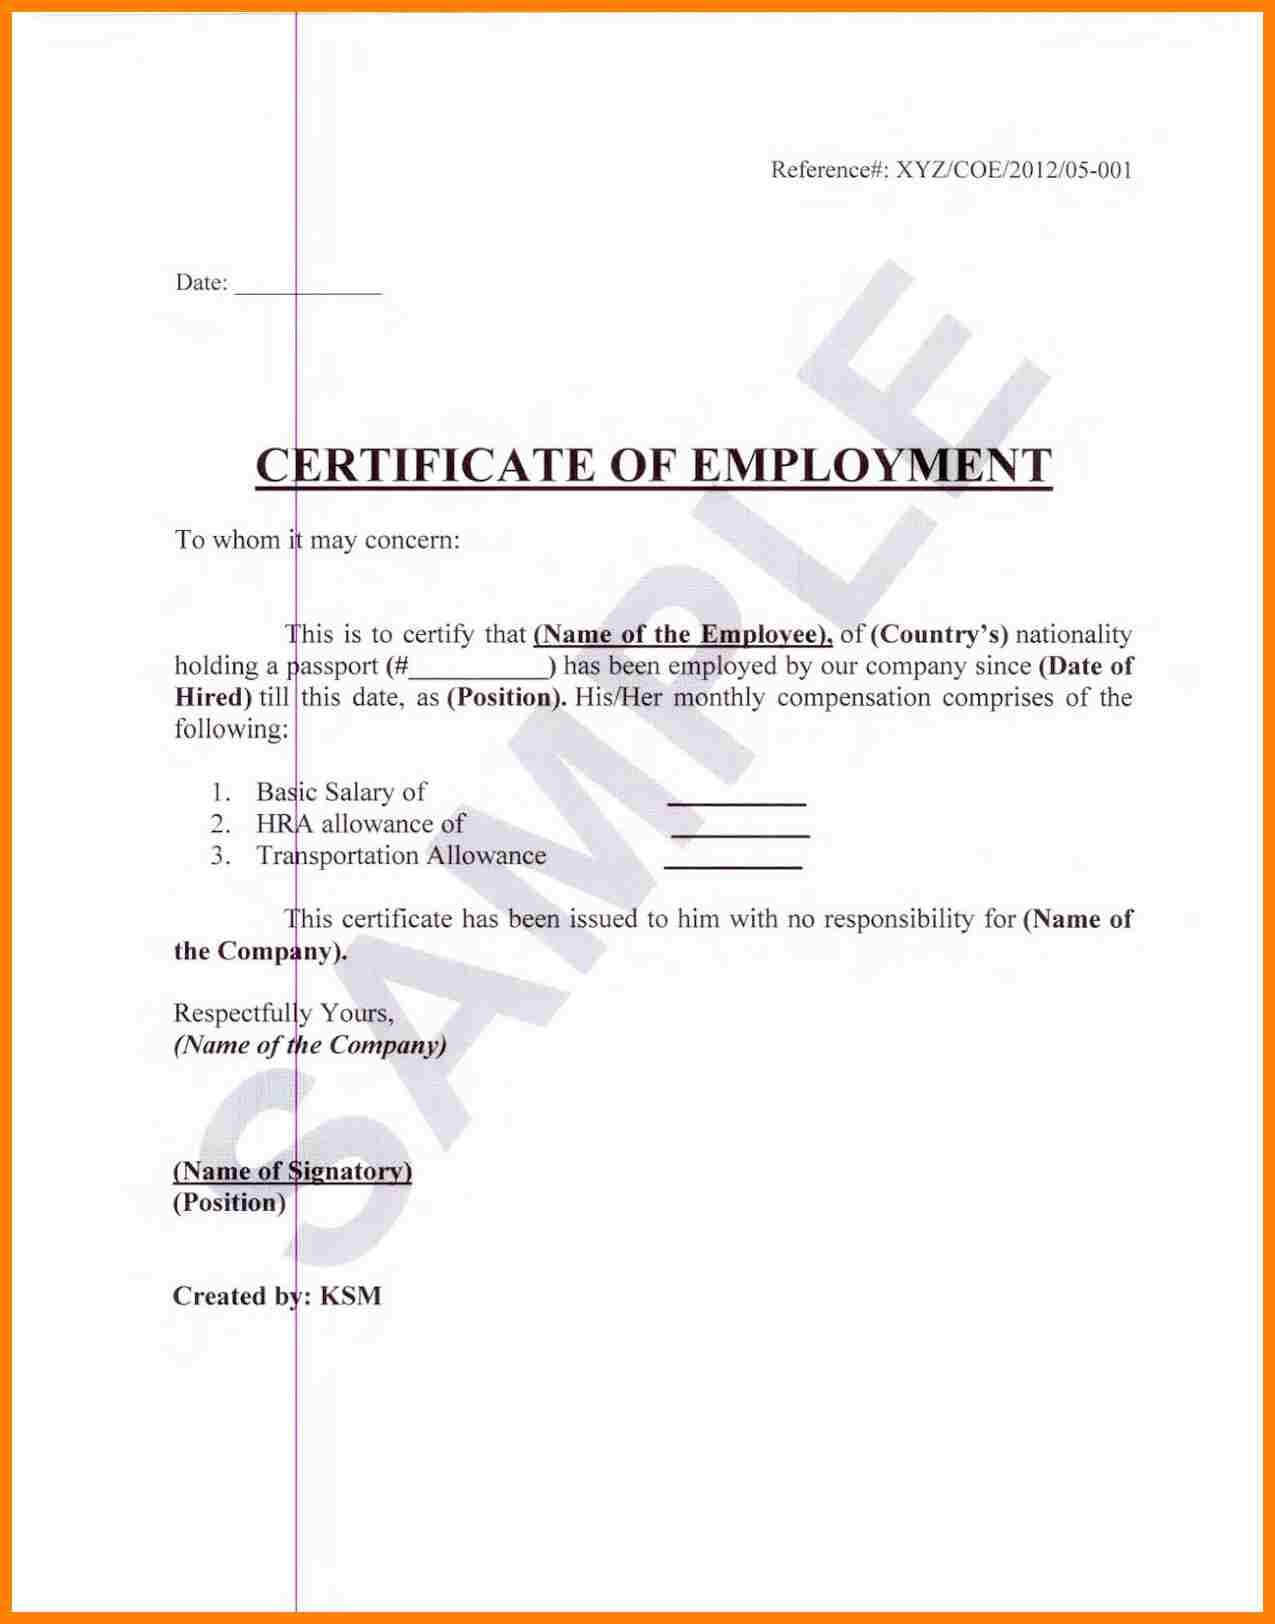 Sample Certification Employment Certificate Tugon Med Clinic Within Employee Certificate Of Service Template